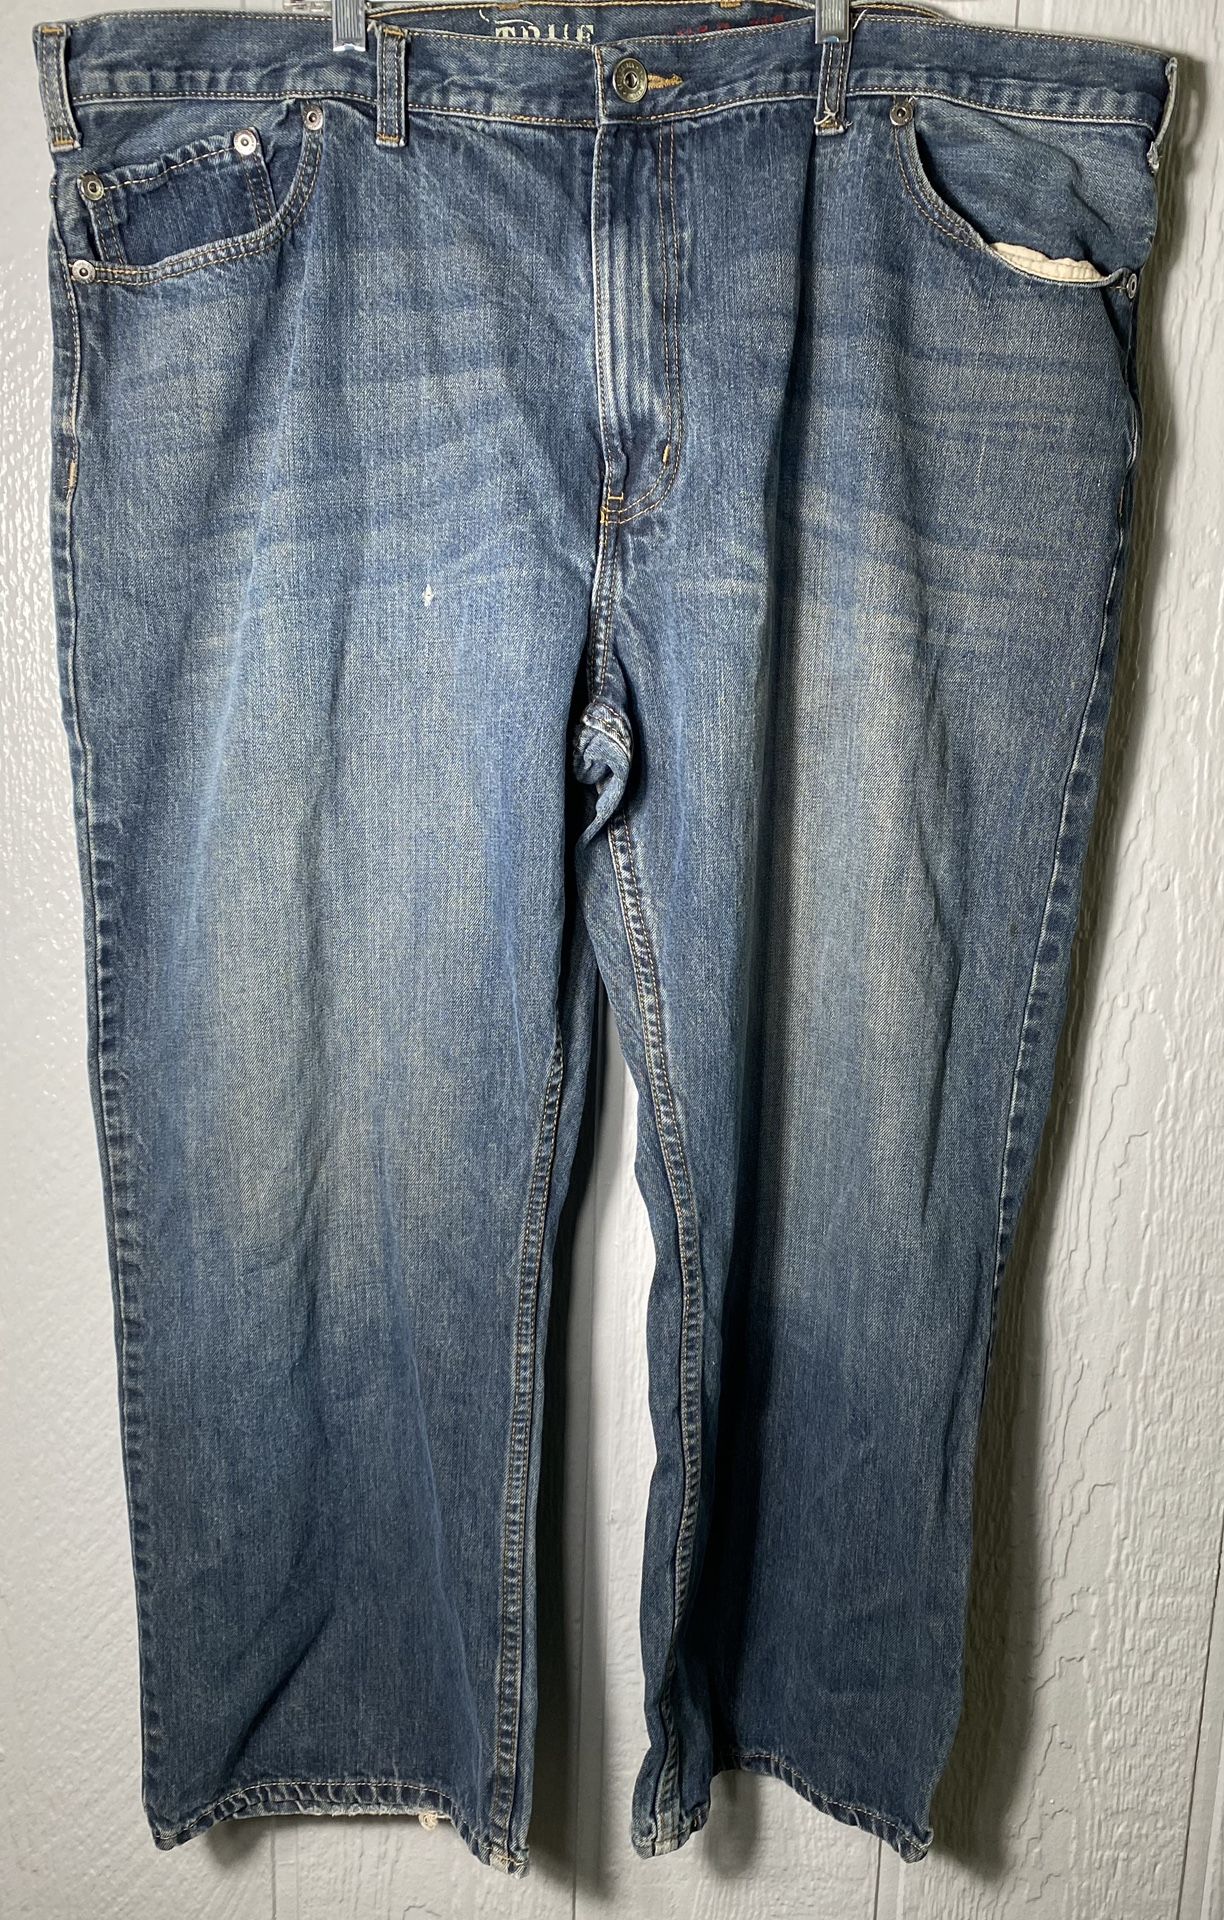 True Nation Relaxed Fit Medium Wash Blue Jeans Men's 48 x 30